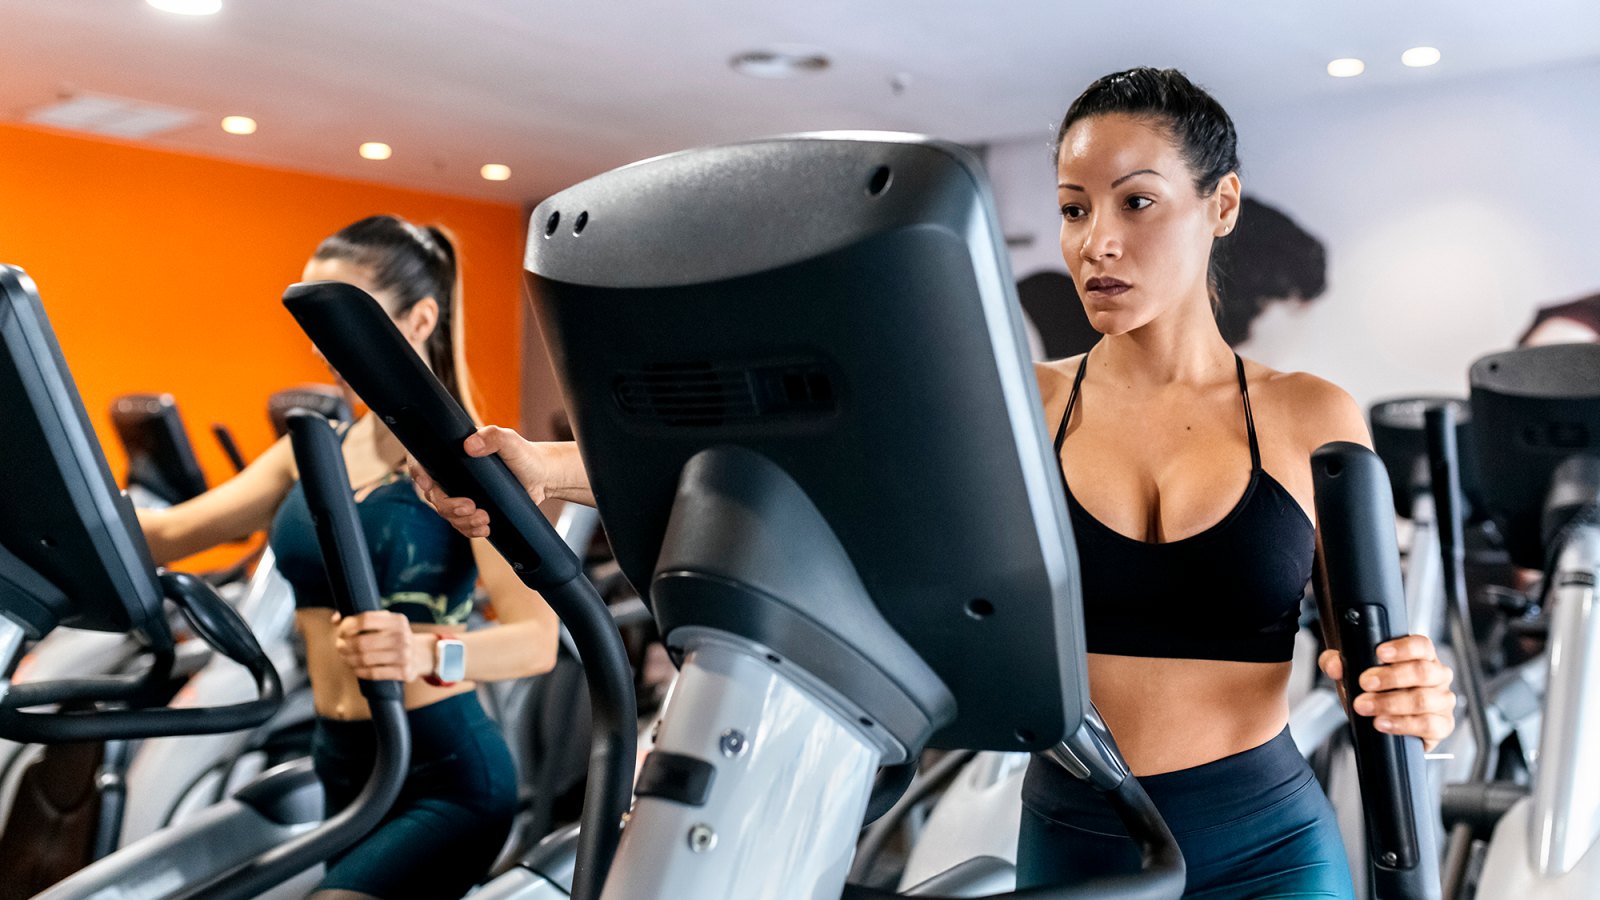 The Best Elliptical for Easy At-Home Workouts Is Under $100 at Walmart